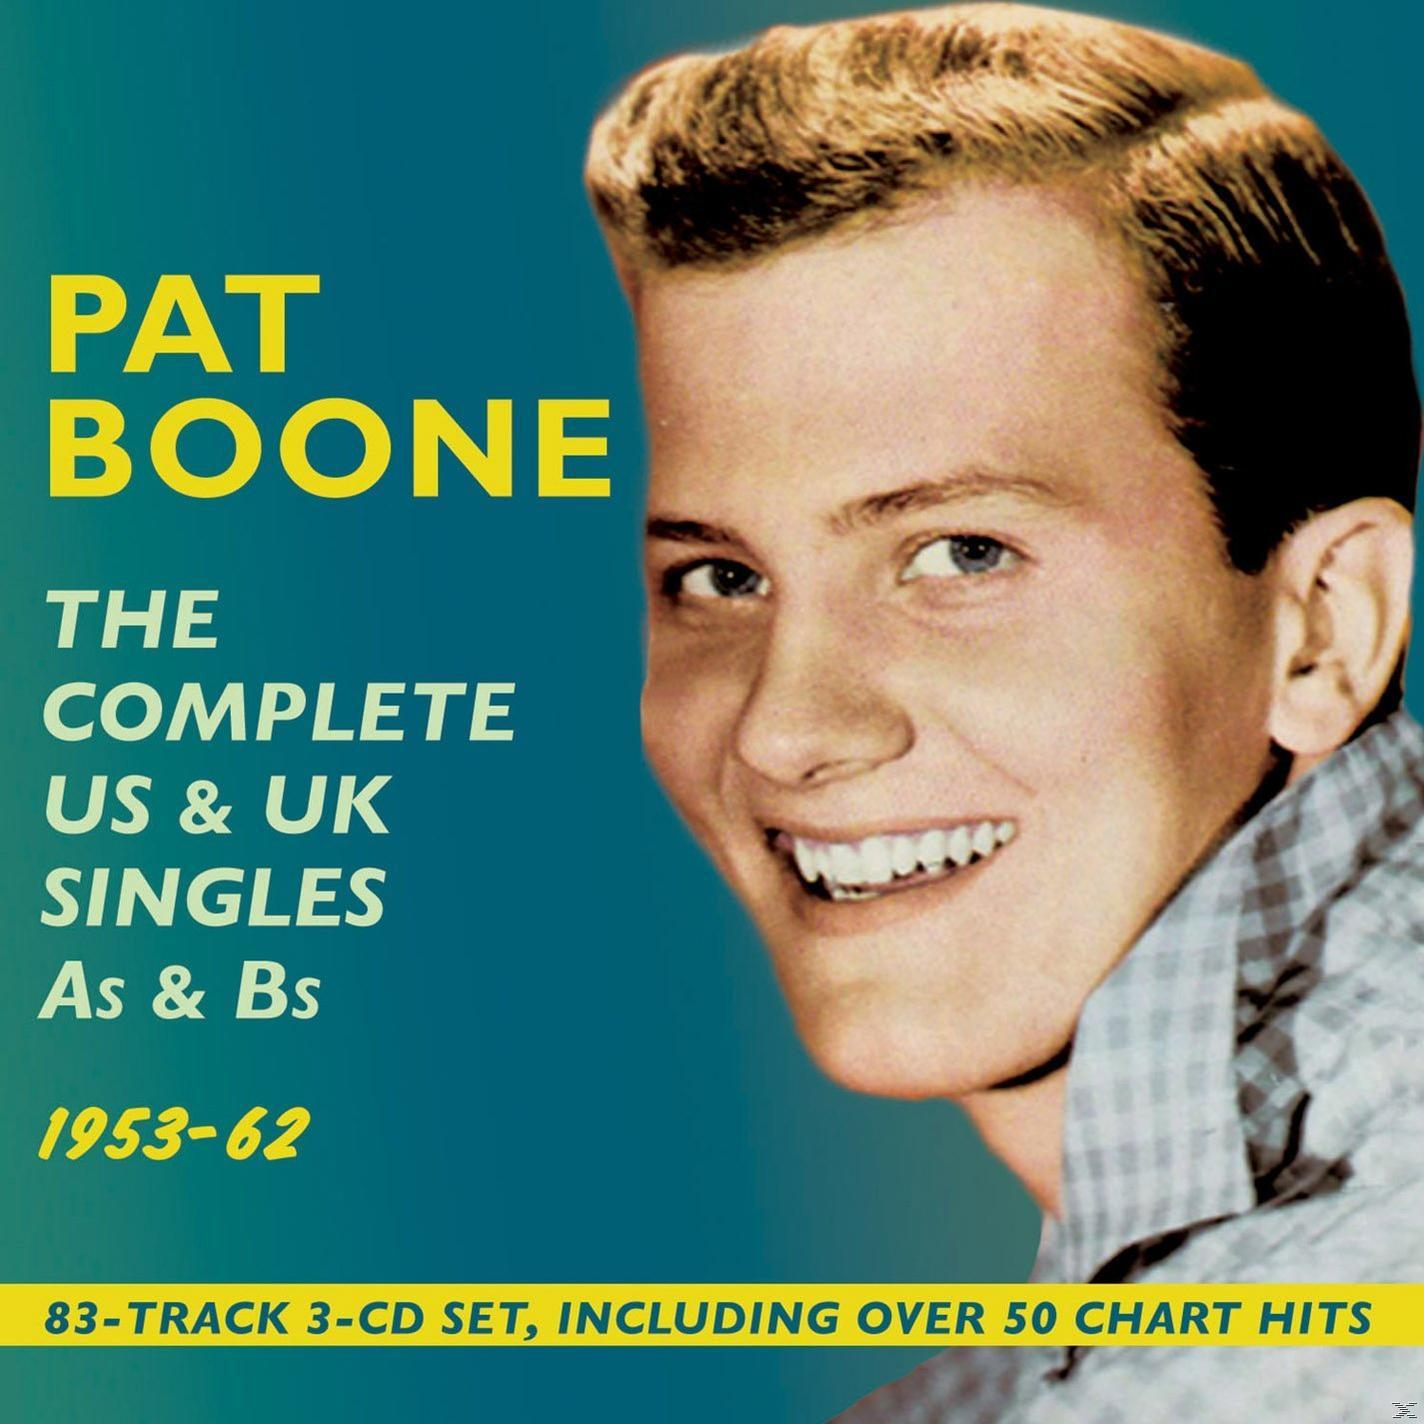 Us As Complete 1953-62 Uk Singles Boone Pat - Bs The (CD) & & -